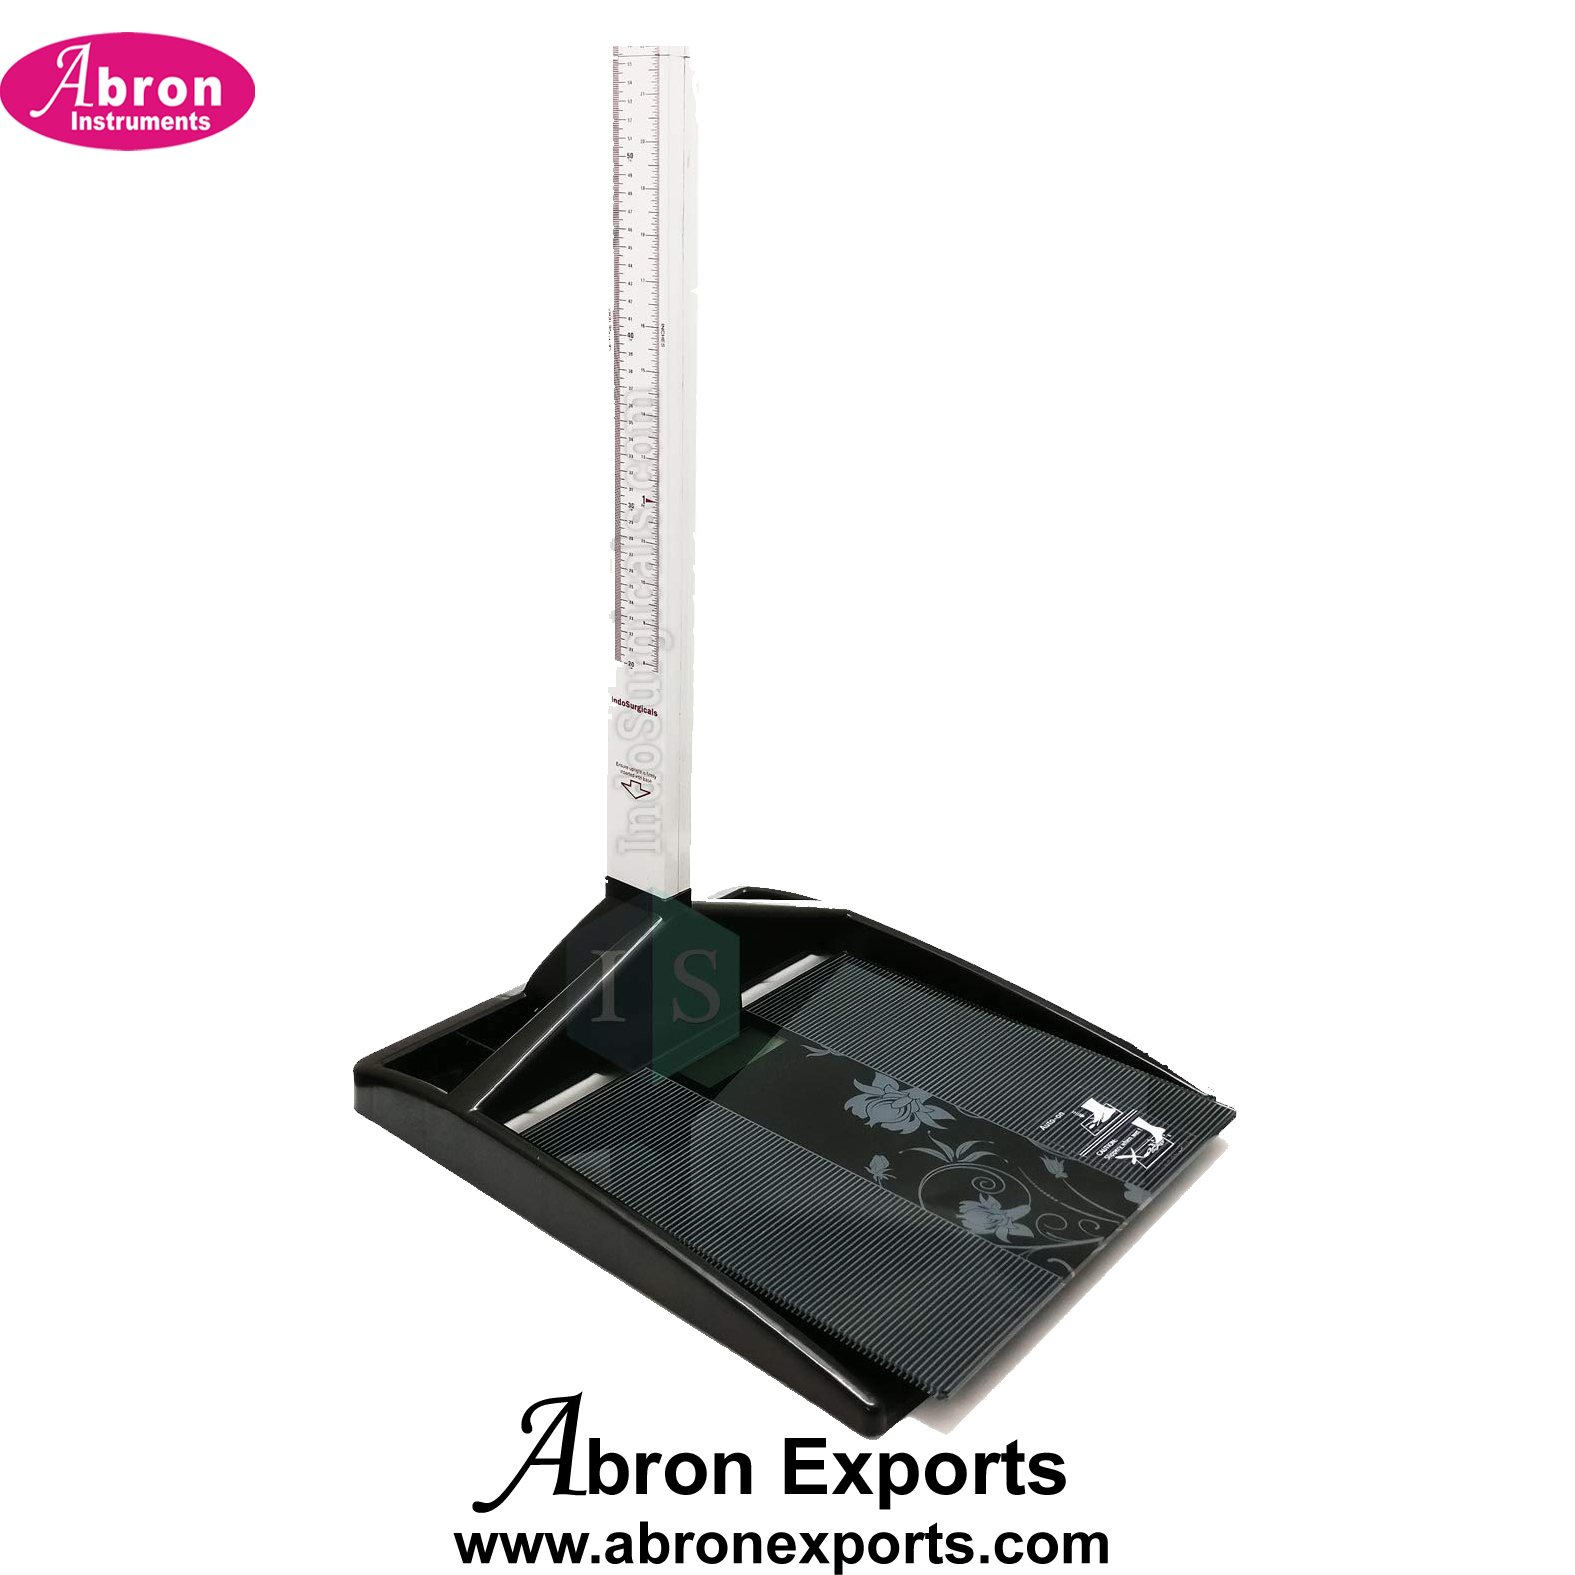 Stadiometer Height Scale  20-210cmx1mm Measuring Scale Folding Abron ABM-2520HS 